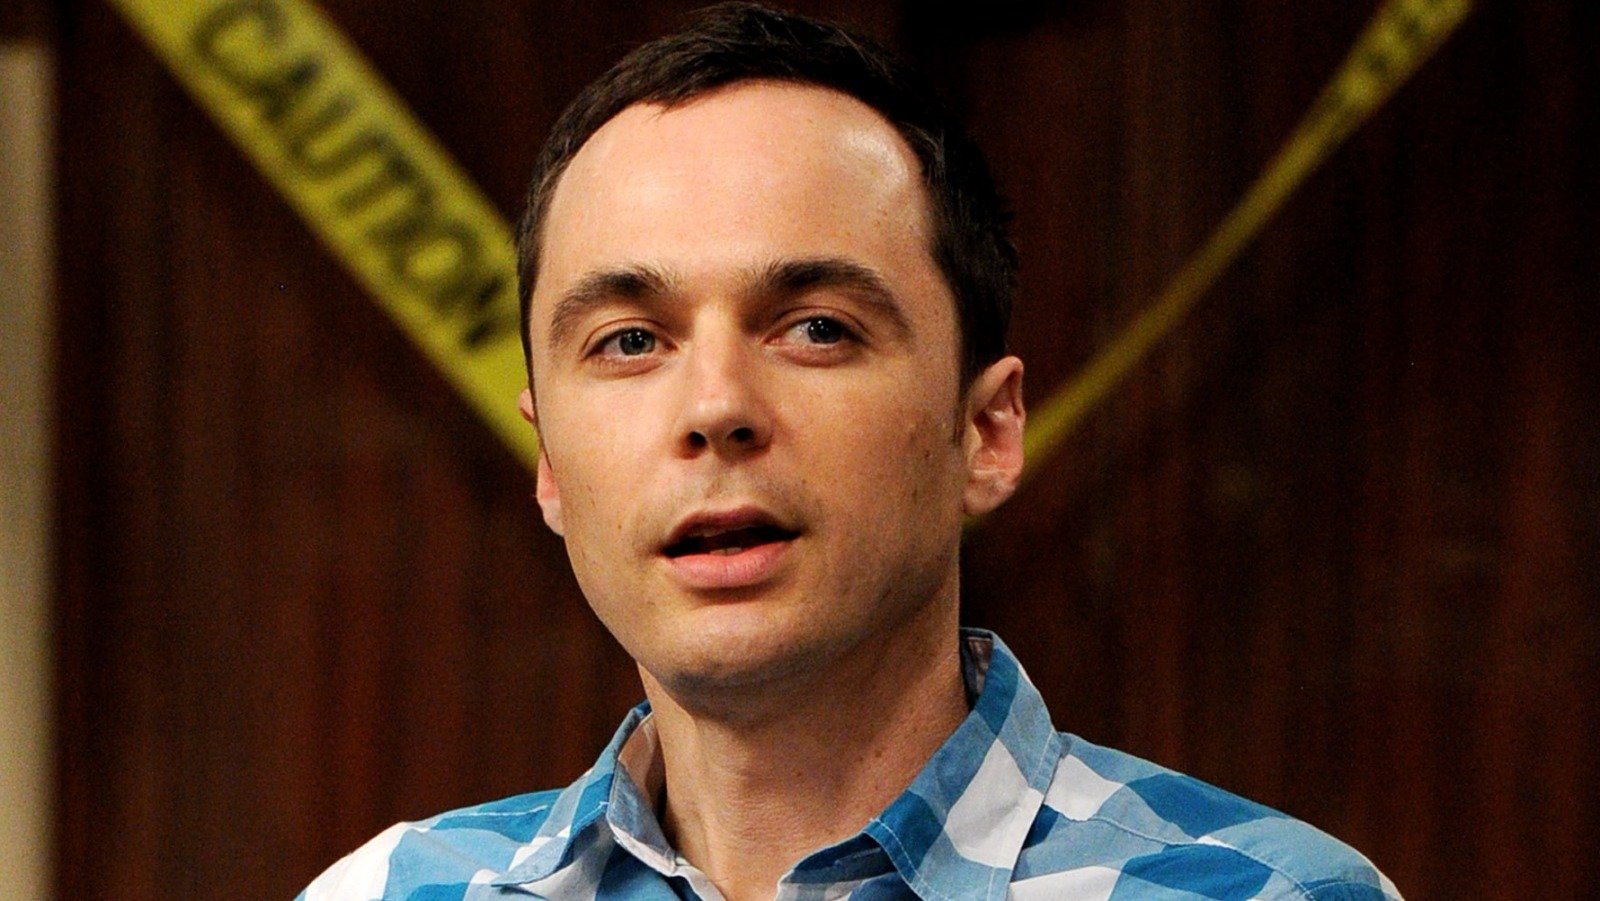 We Finally Know Why The Big Bang Theory Got Canceled - The List